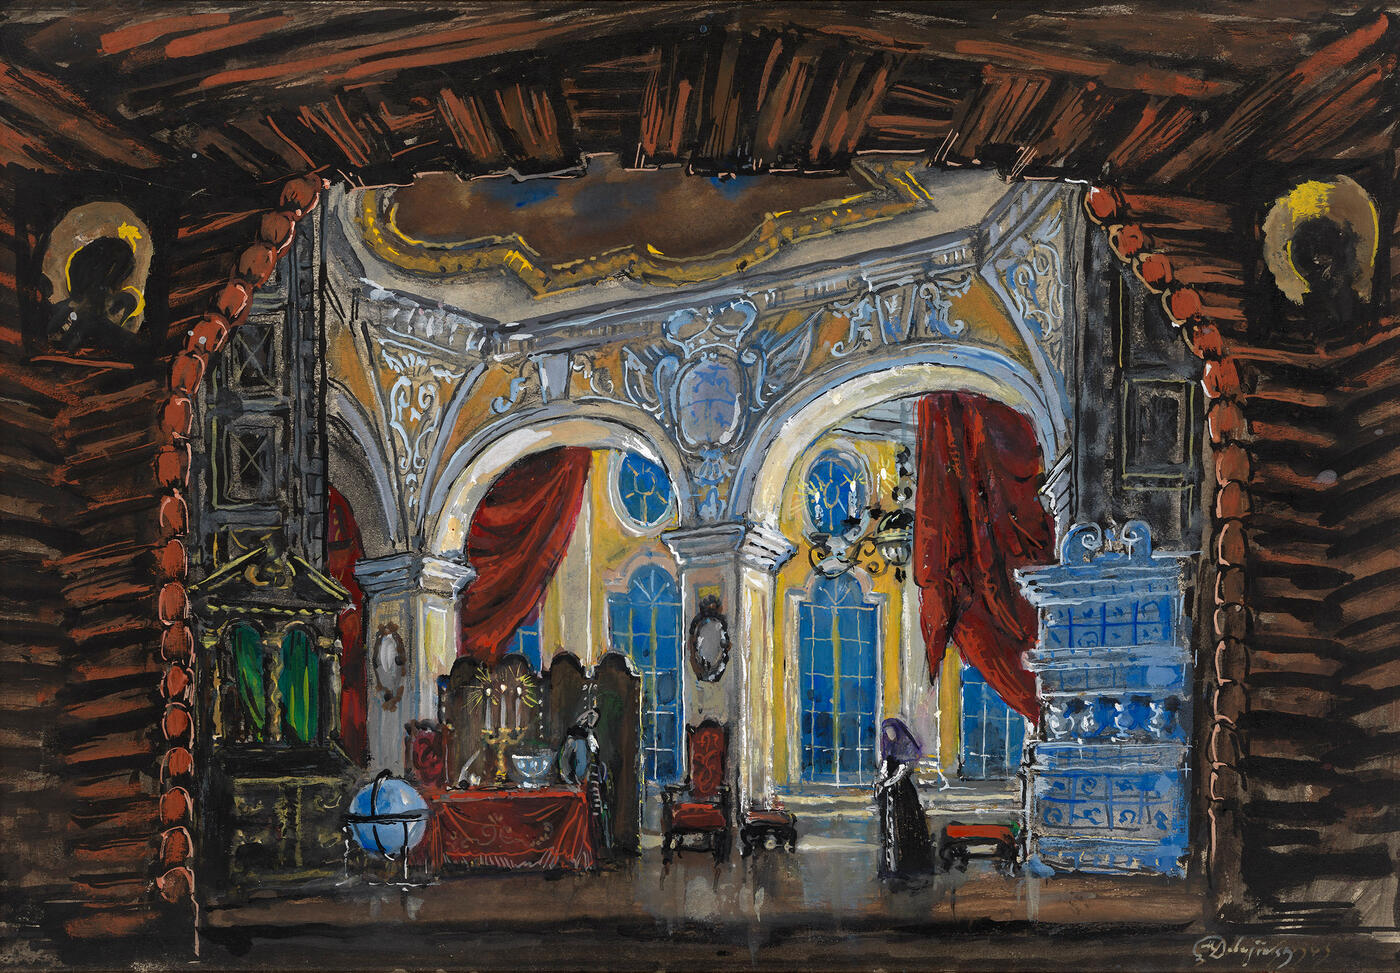 Set Design for the Second Act of Mussorgsky's Opera "Khovanshchina"